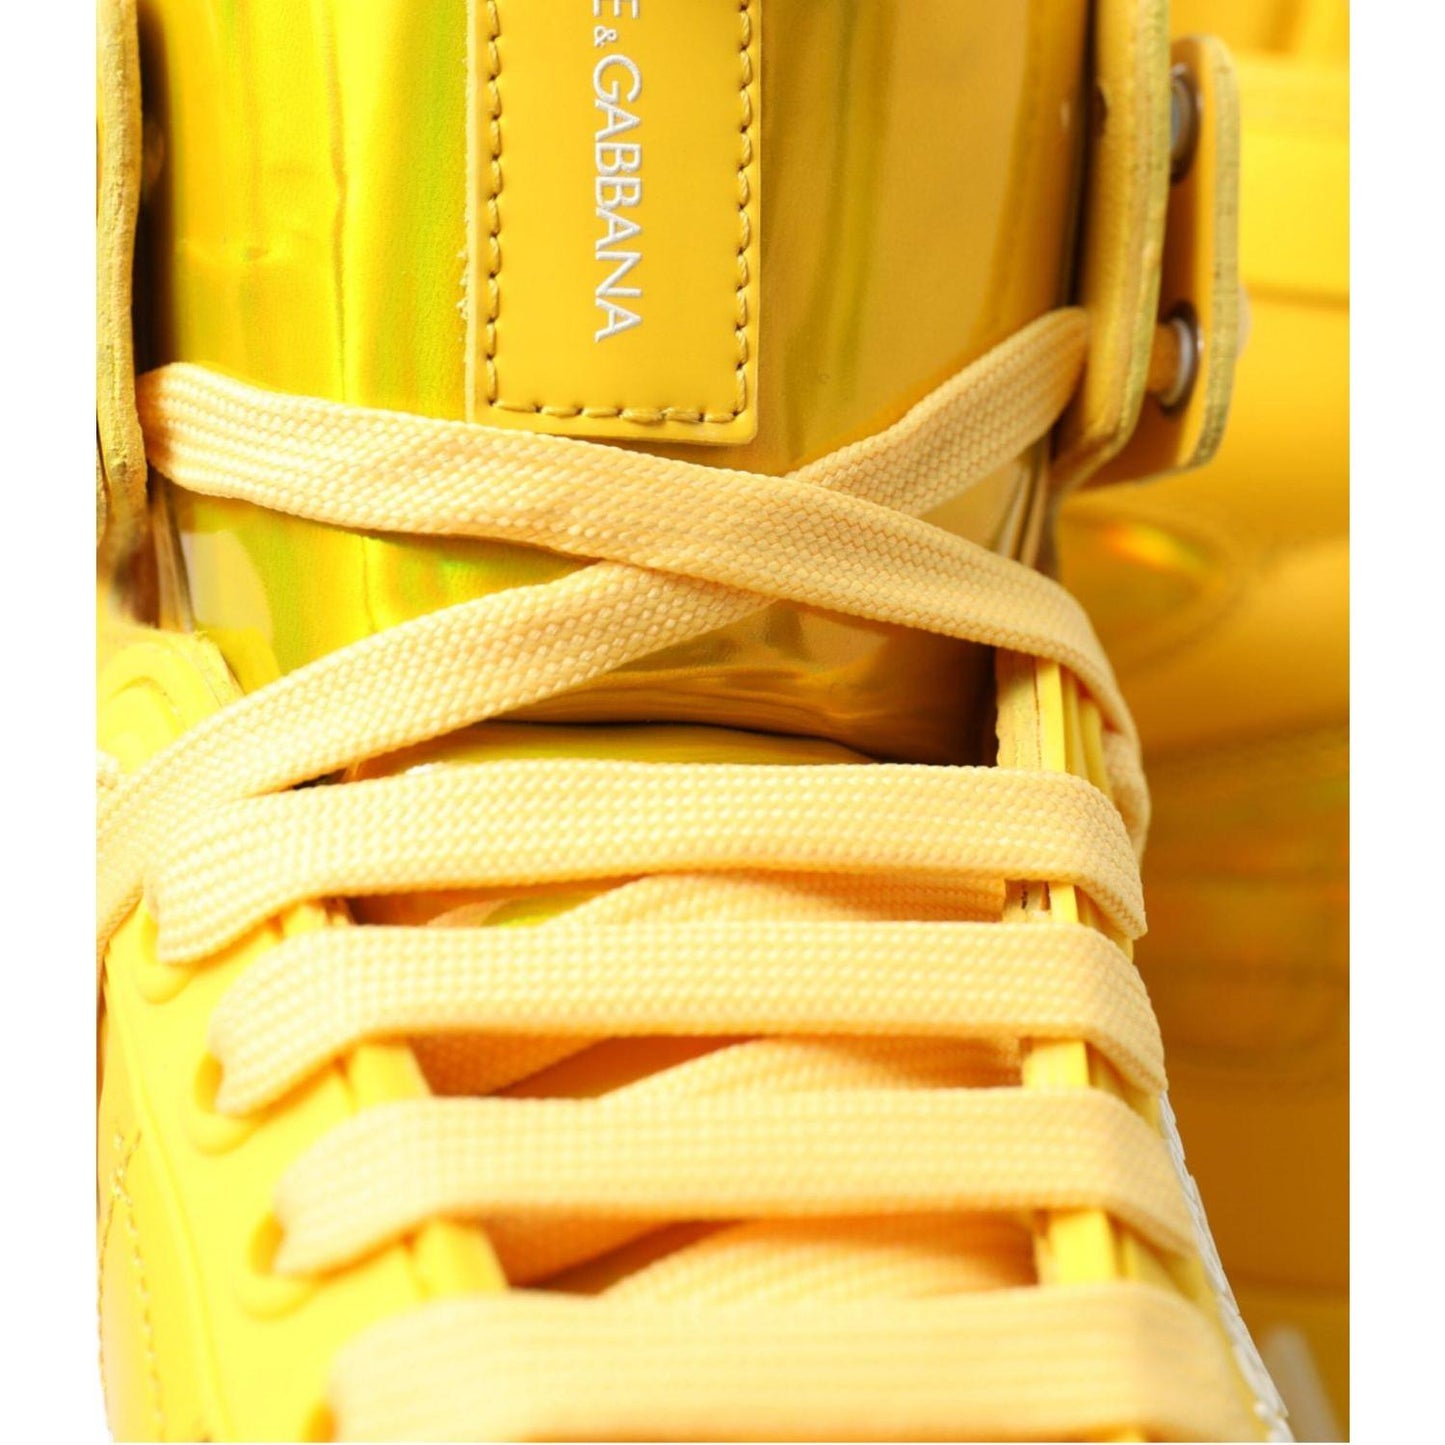 Dolce & Gabbana Chic High-Top Color-Block Sneakers yellow-white-leather-high-top-sneakers-shoes 465A2115-BG-scaled-58ebccf2-003.jpg